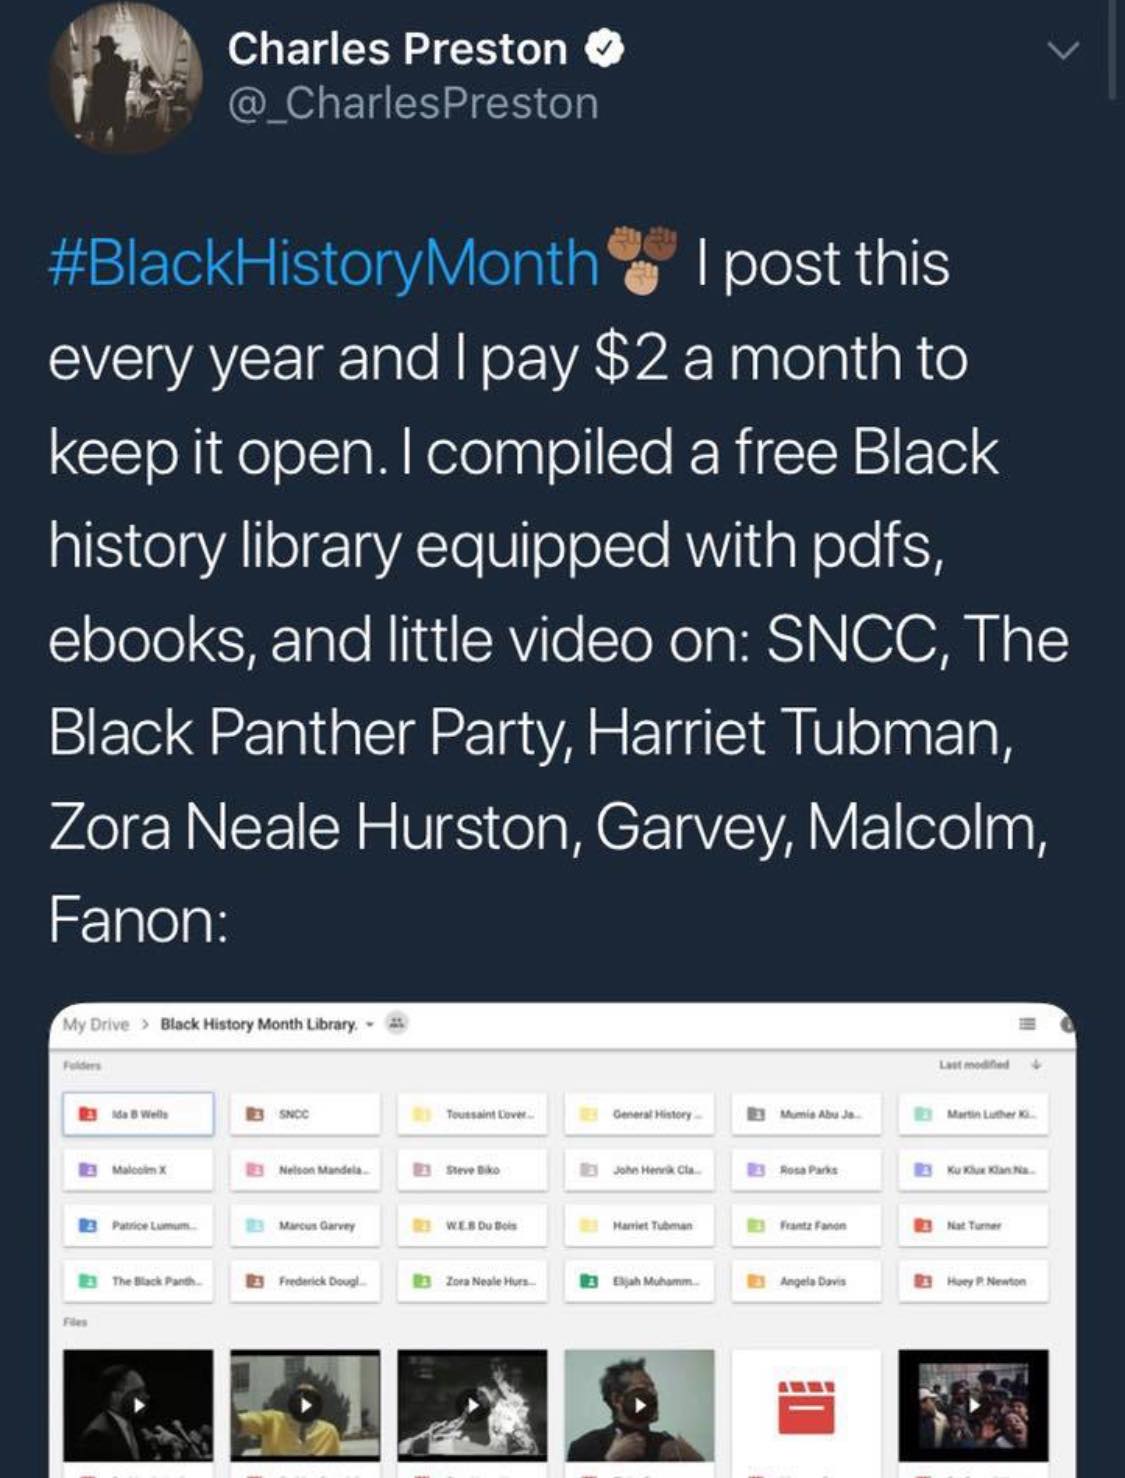 Check this out! #BlackHistoryMonth